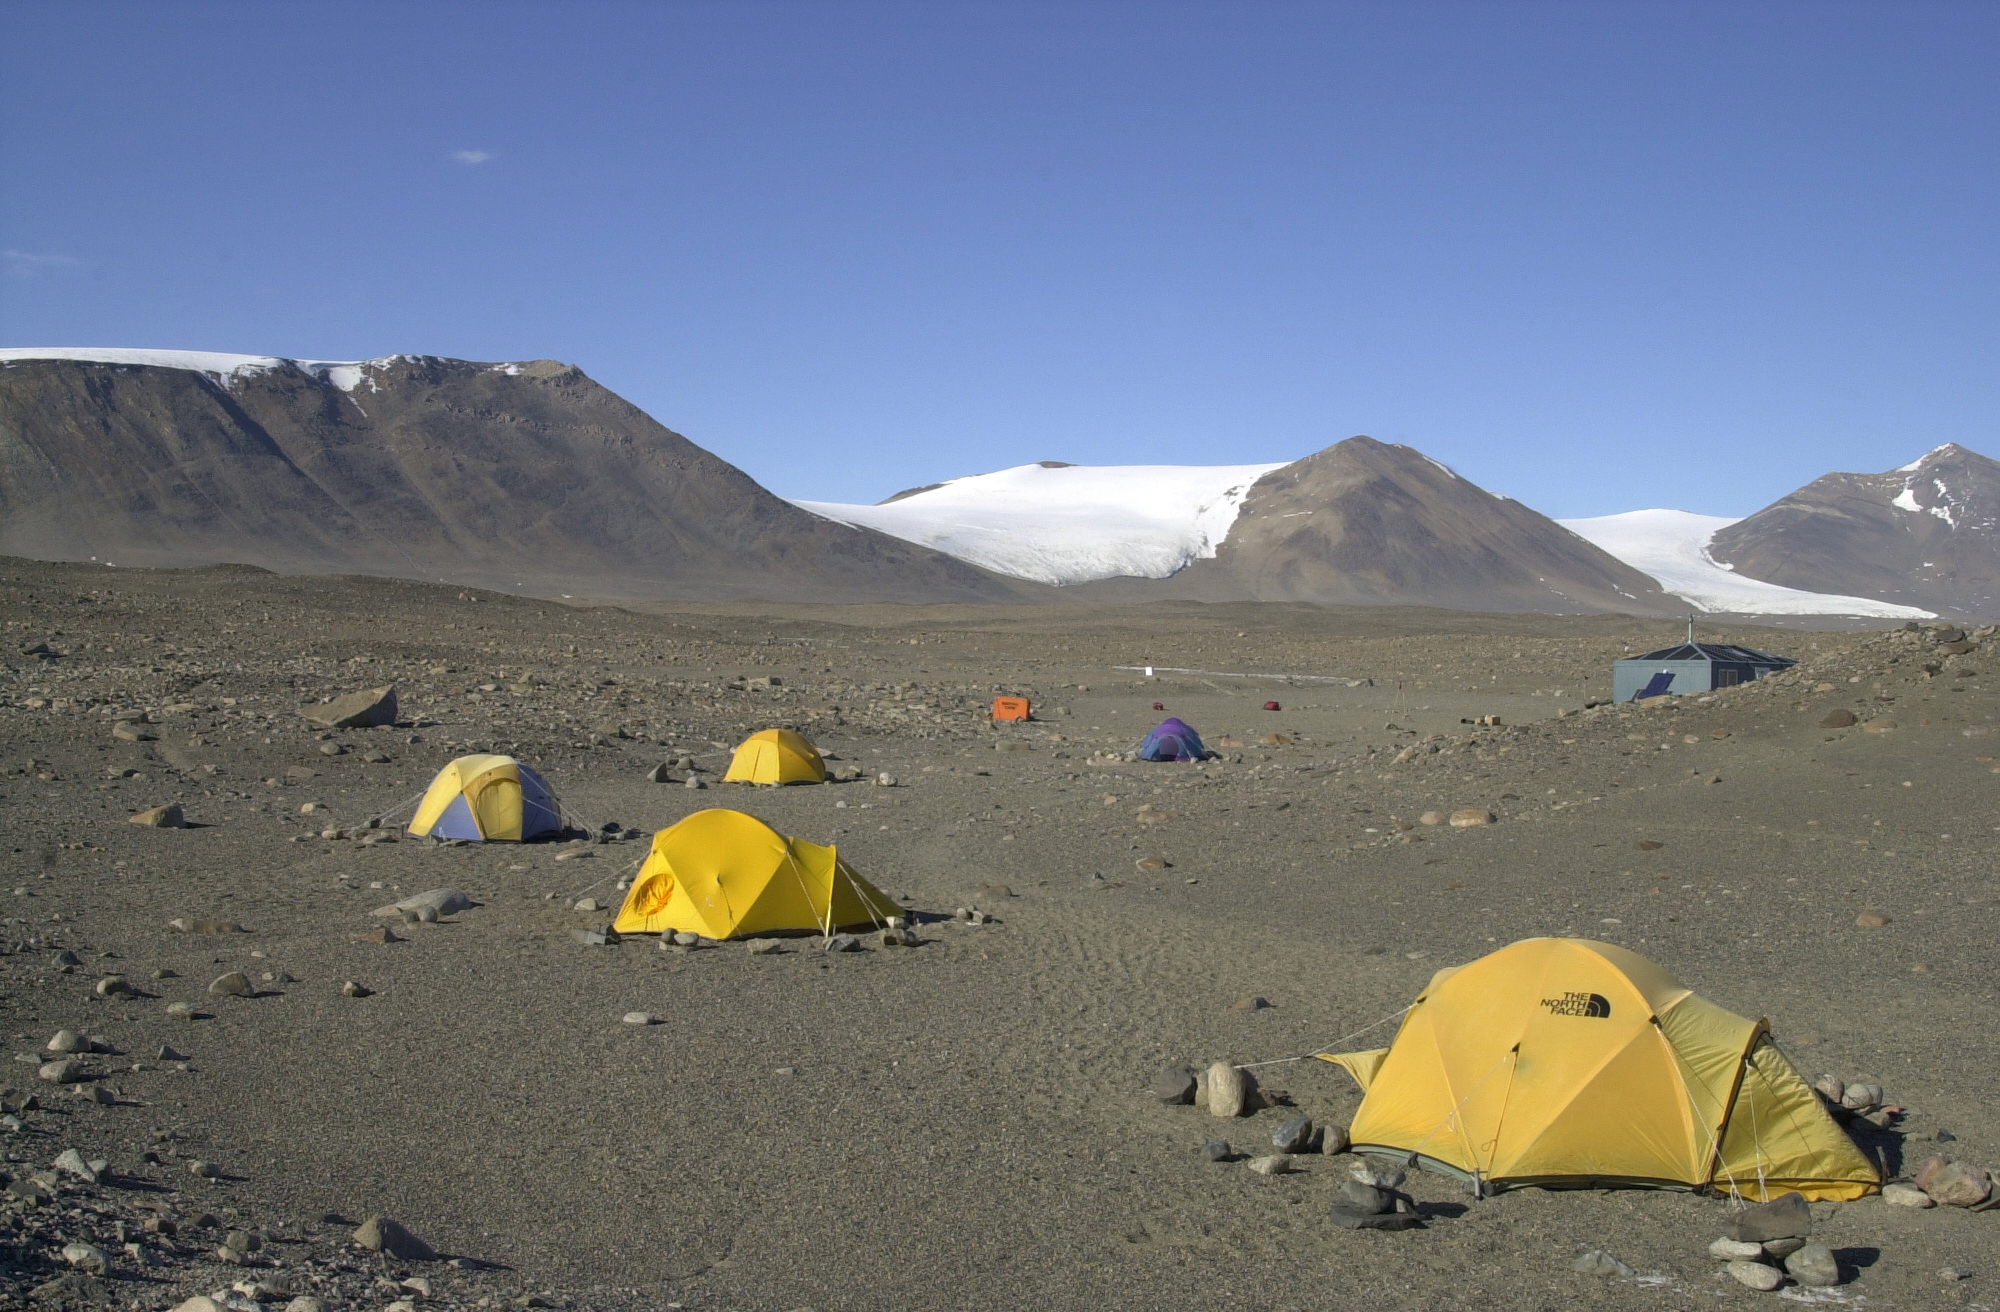 Tents sit on dry, rocky ground.